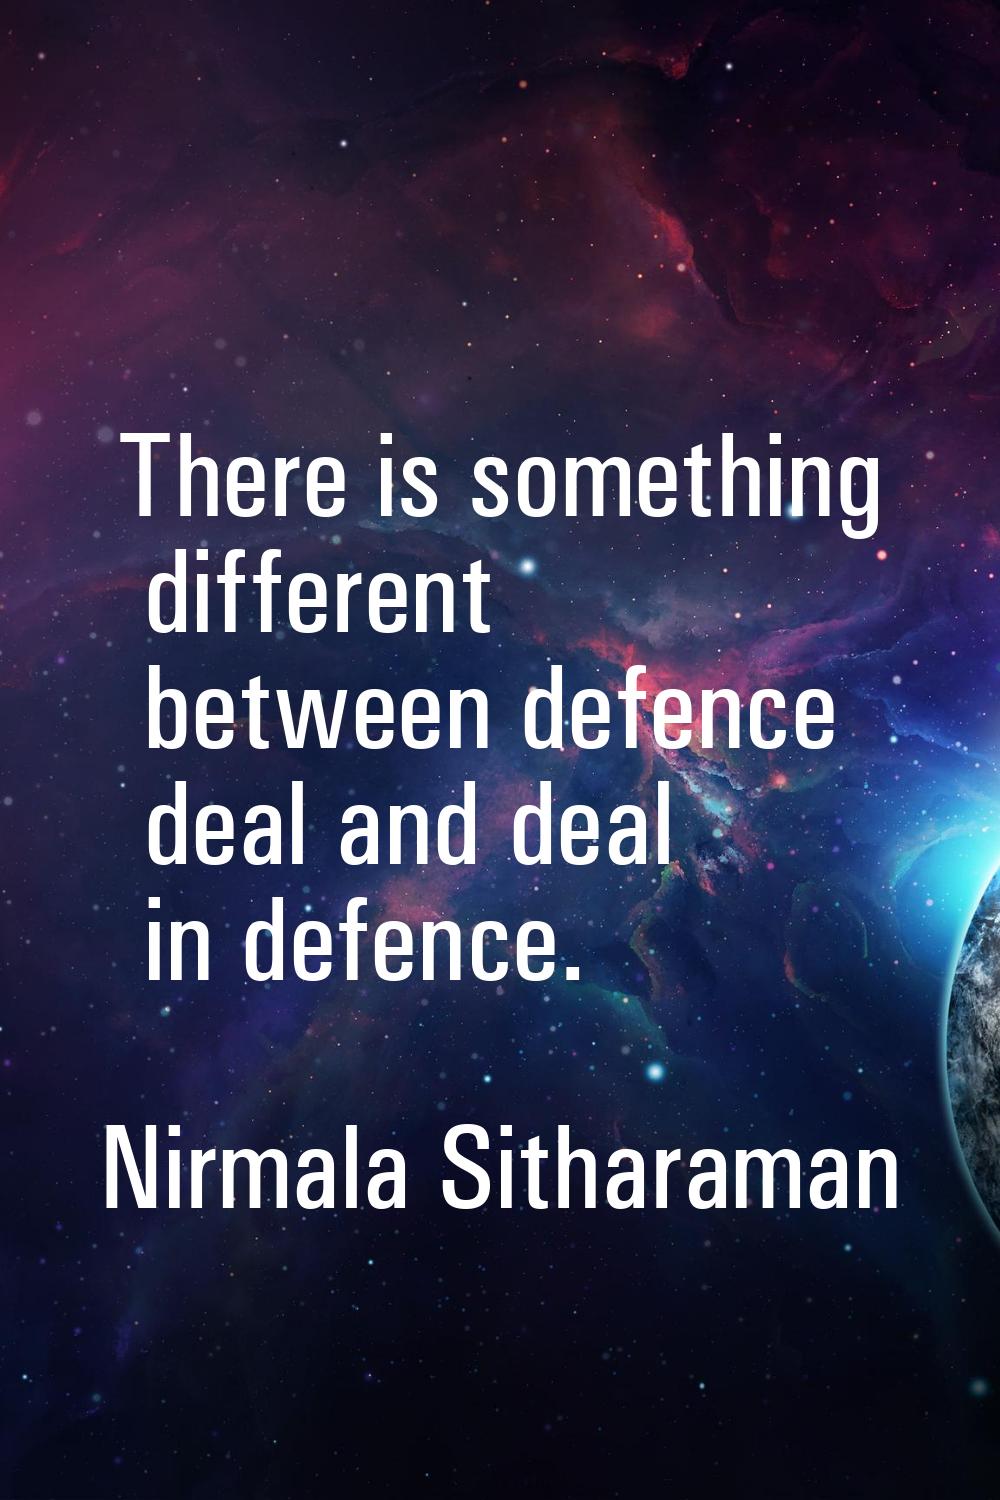 There is something different between defence deal and deal in defence.